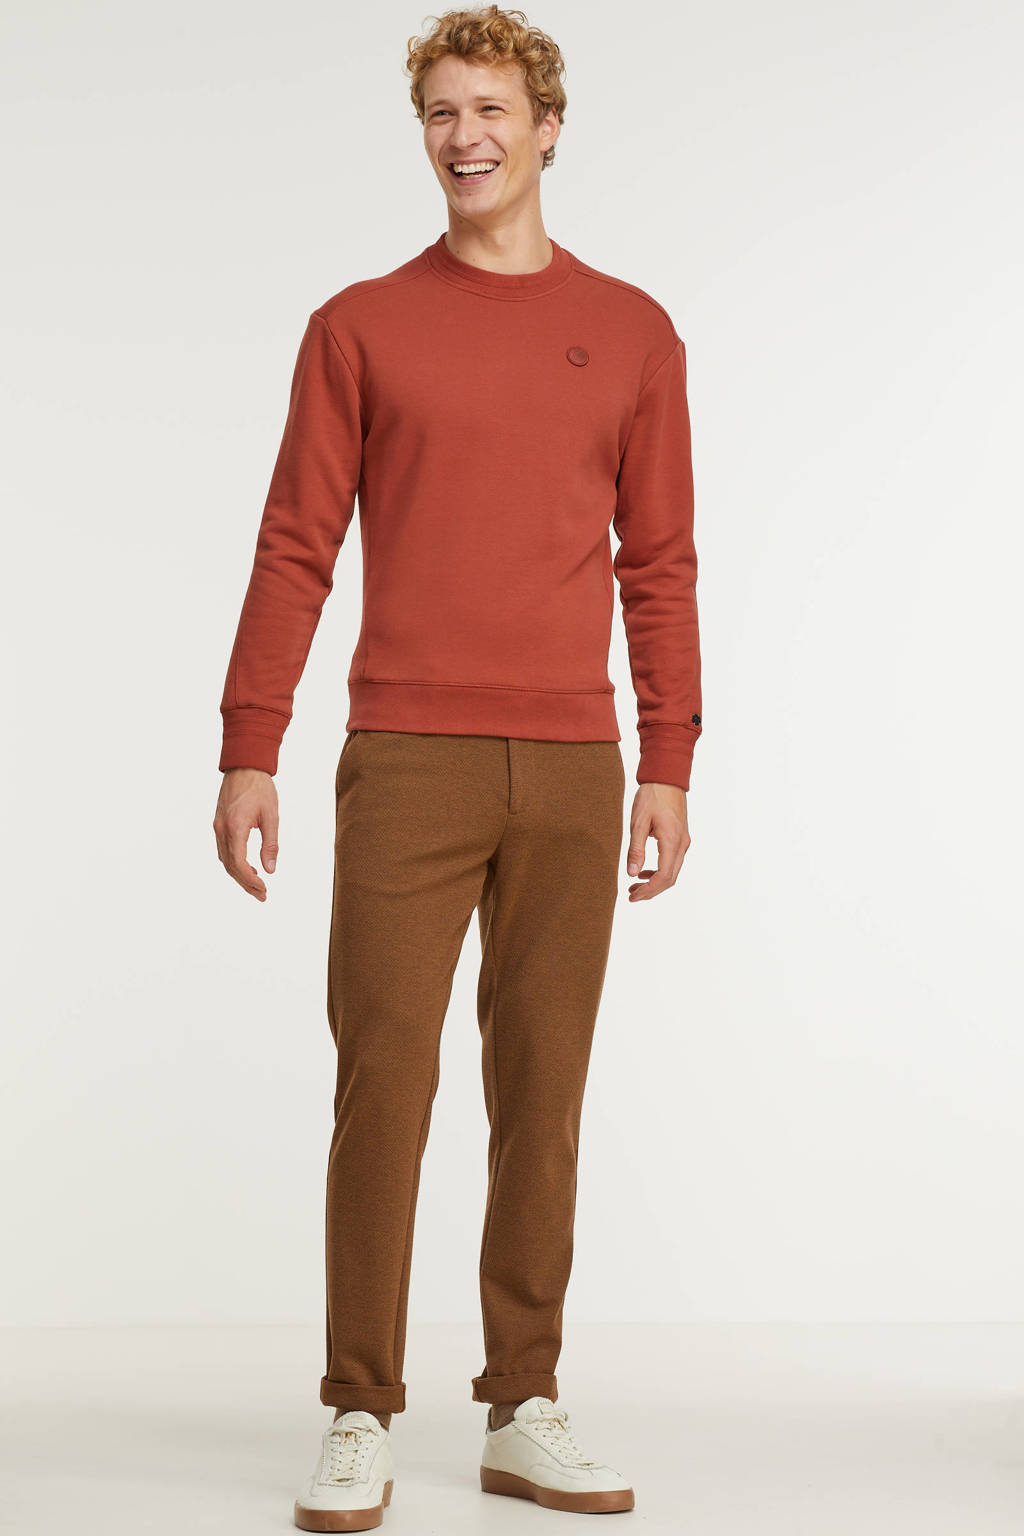 Cast Iron sweater 3051 red